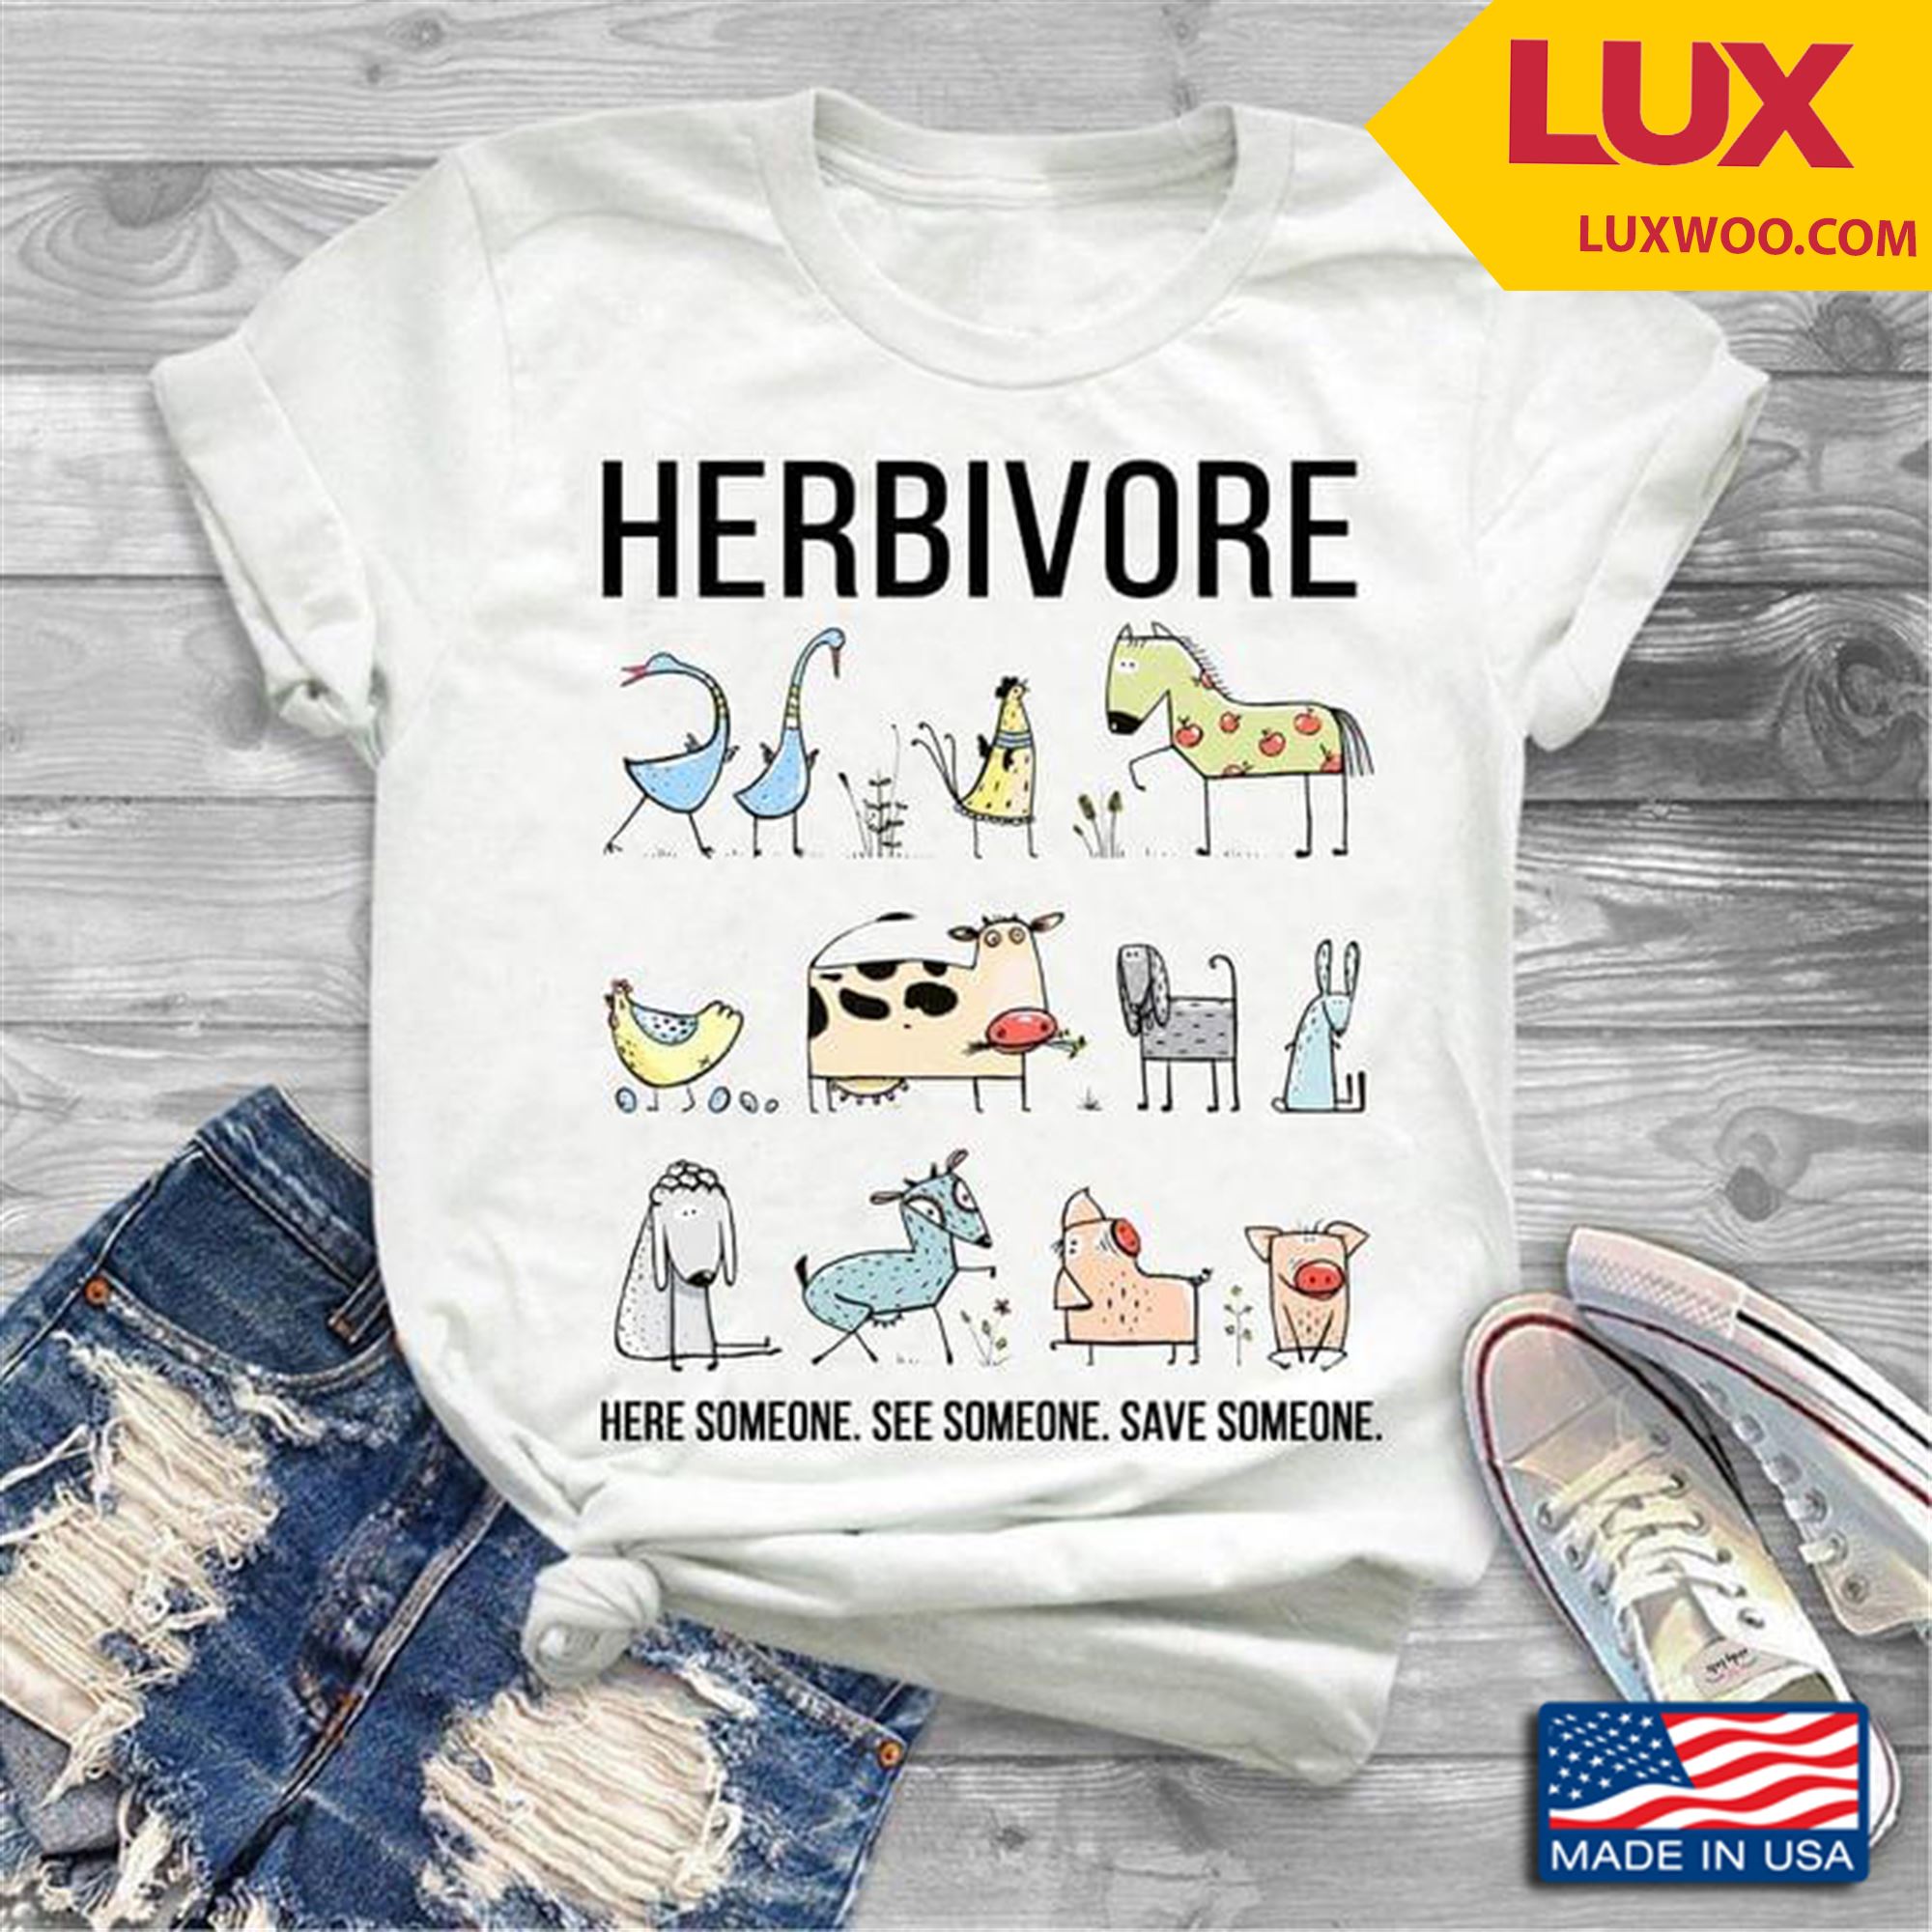 Herbivore Here Someone See Someone Save Someone Tshirt Size Up To 5xl